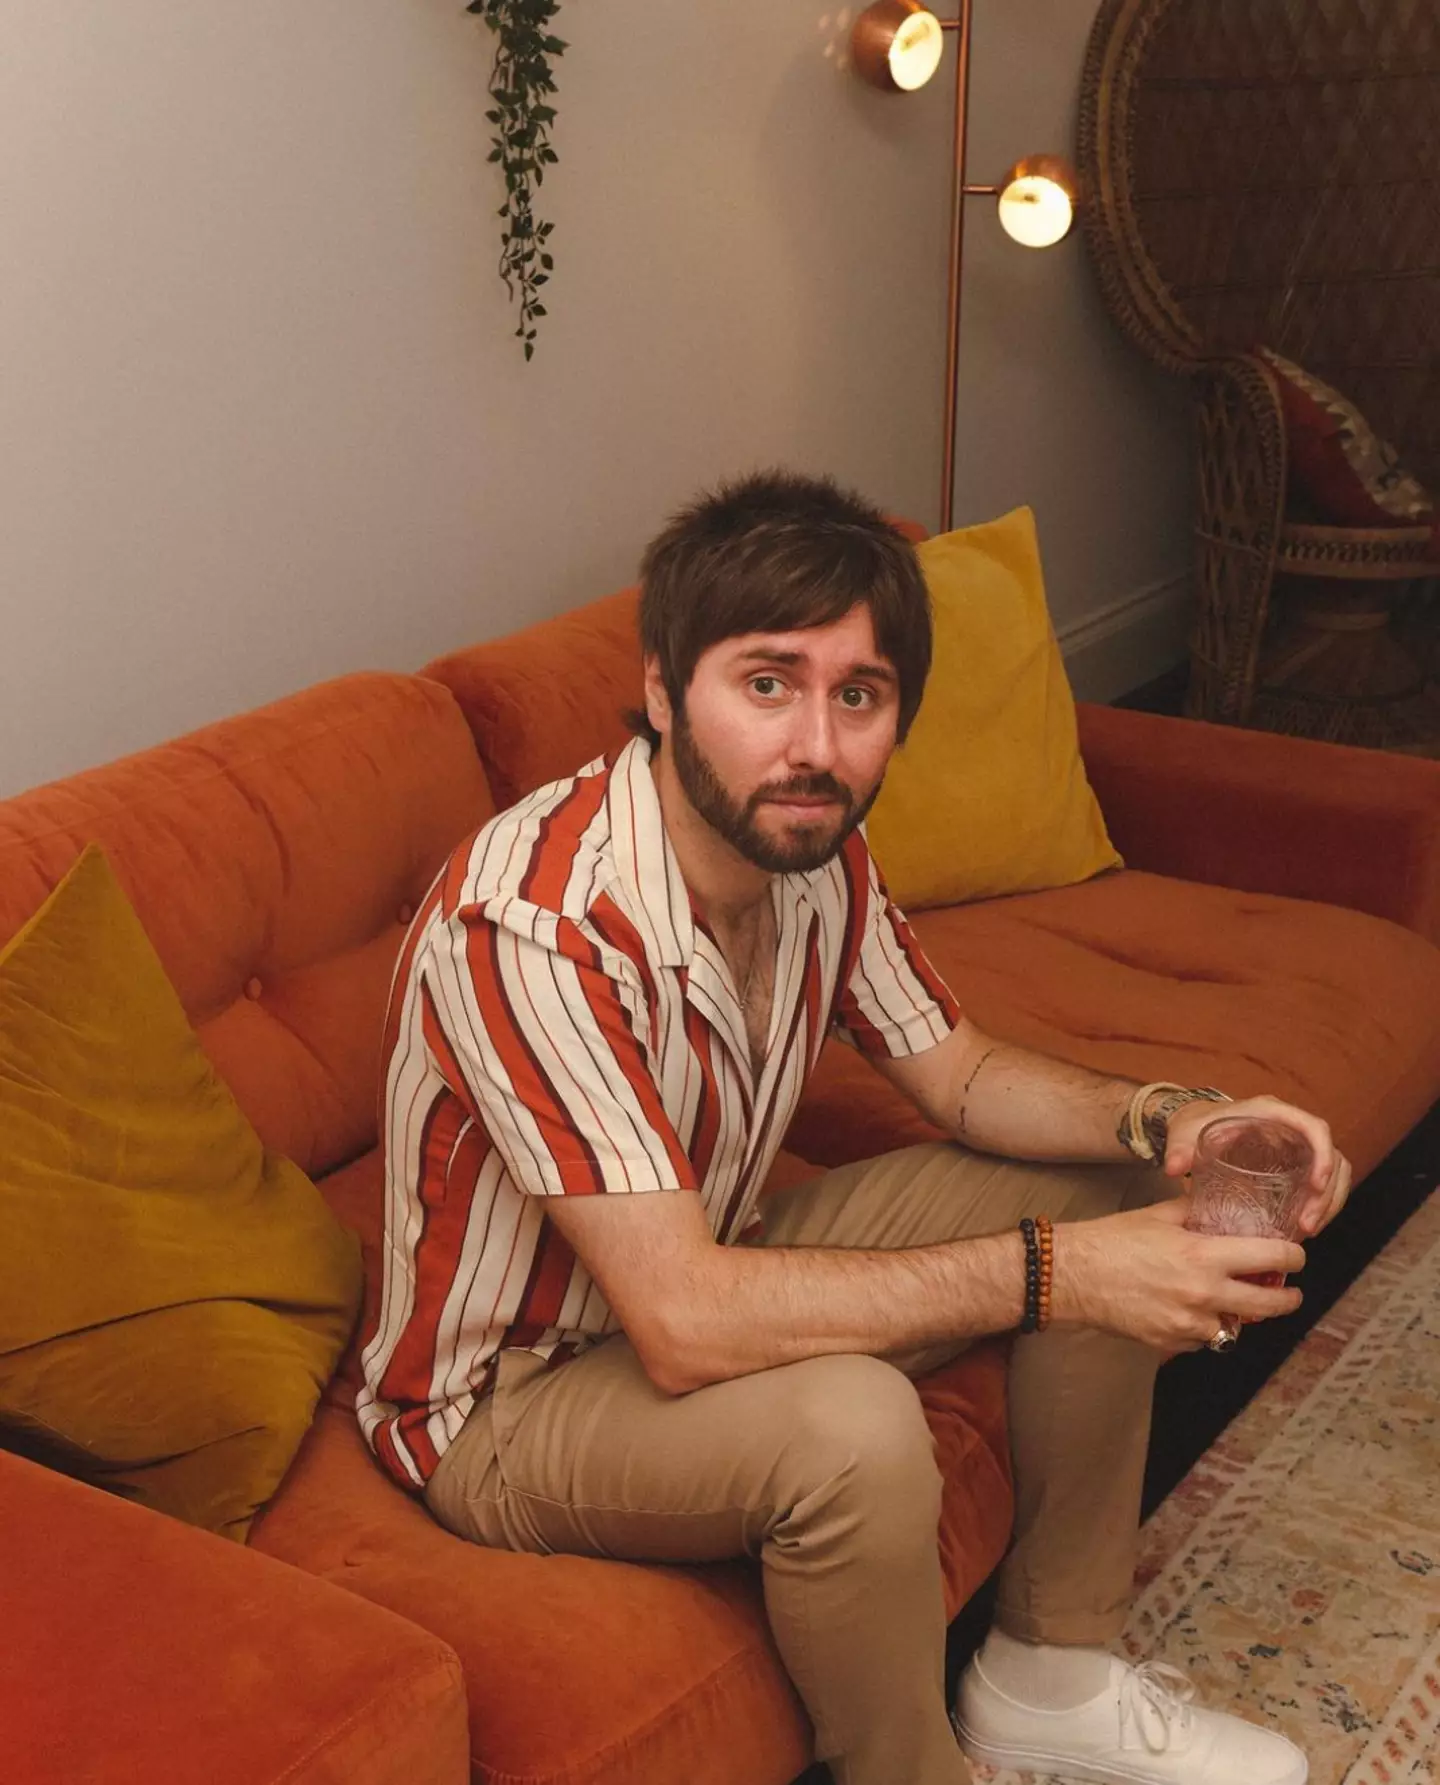 James Buckley has explained why a revival won't happen.